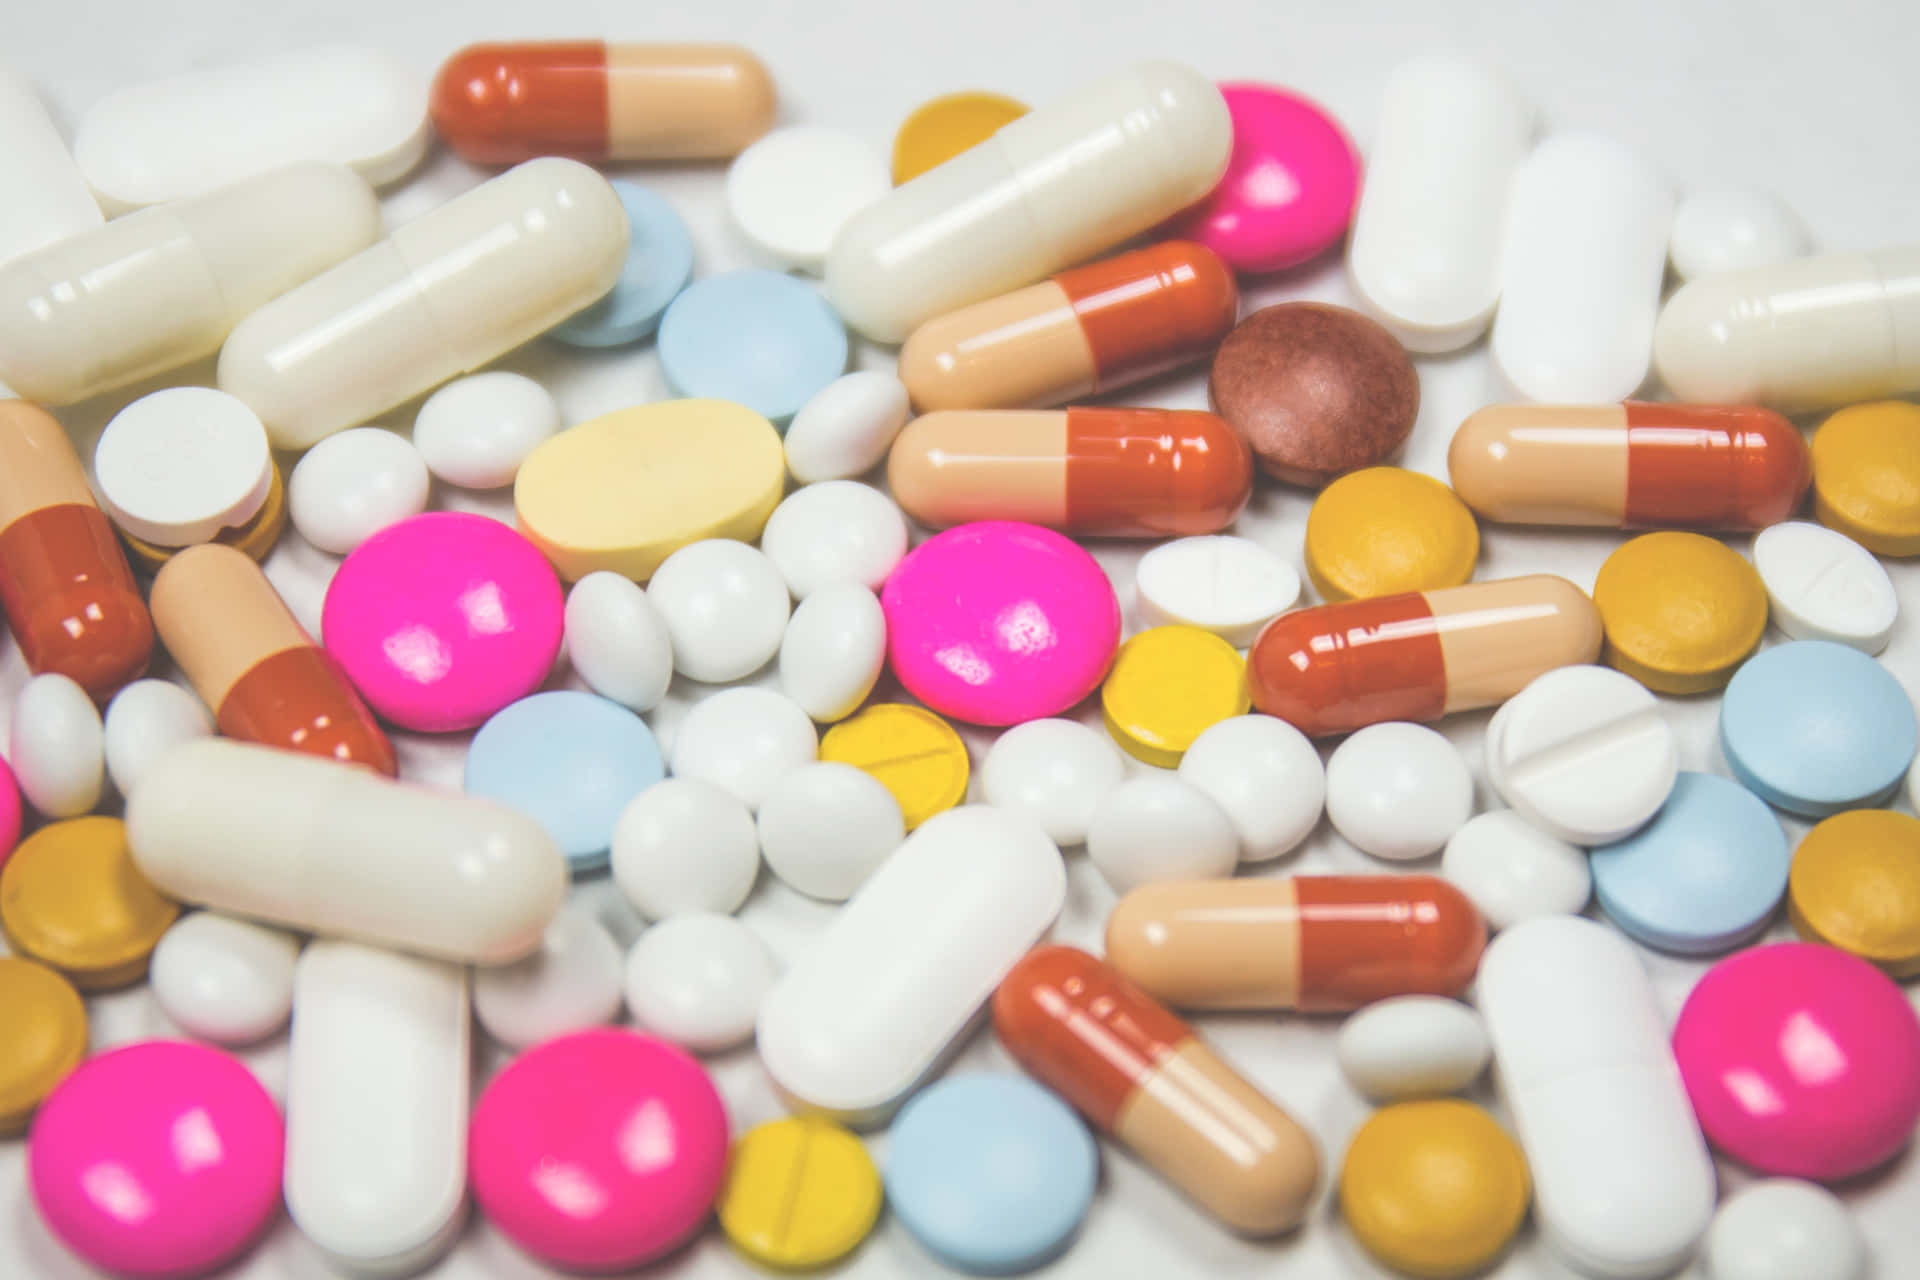 A Pile Of Pills And Capsules On A White Surface